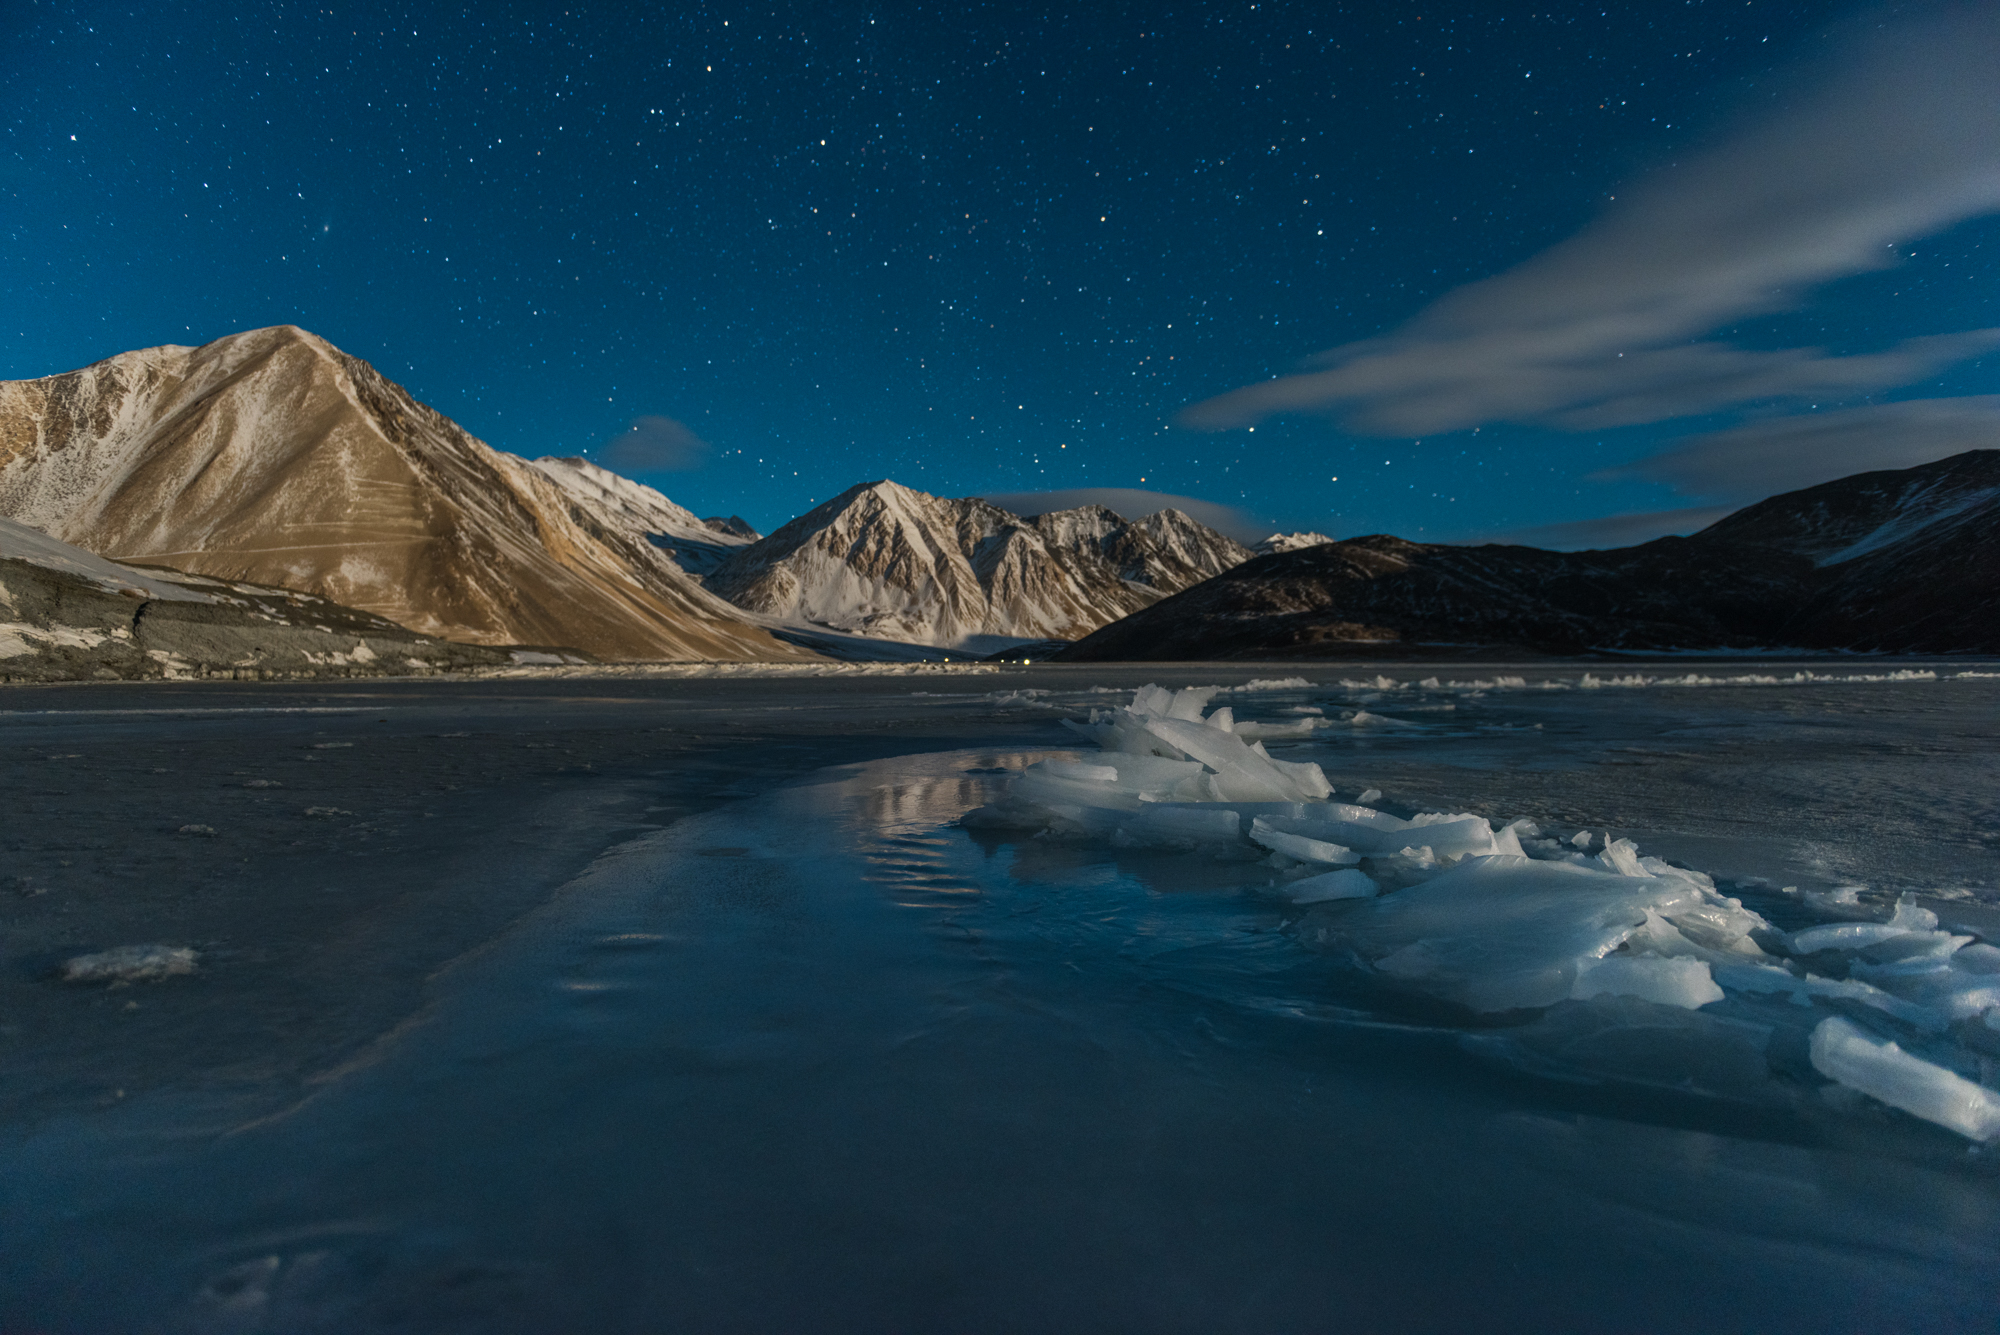 Photo tour and workshop at Ladakh in Winter